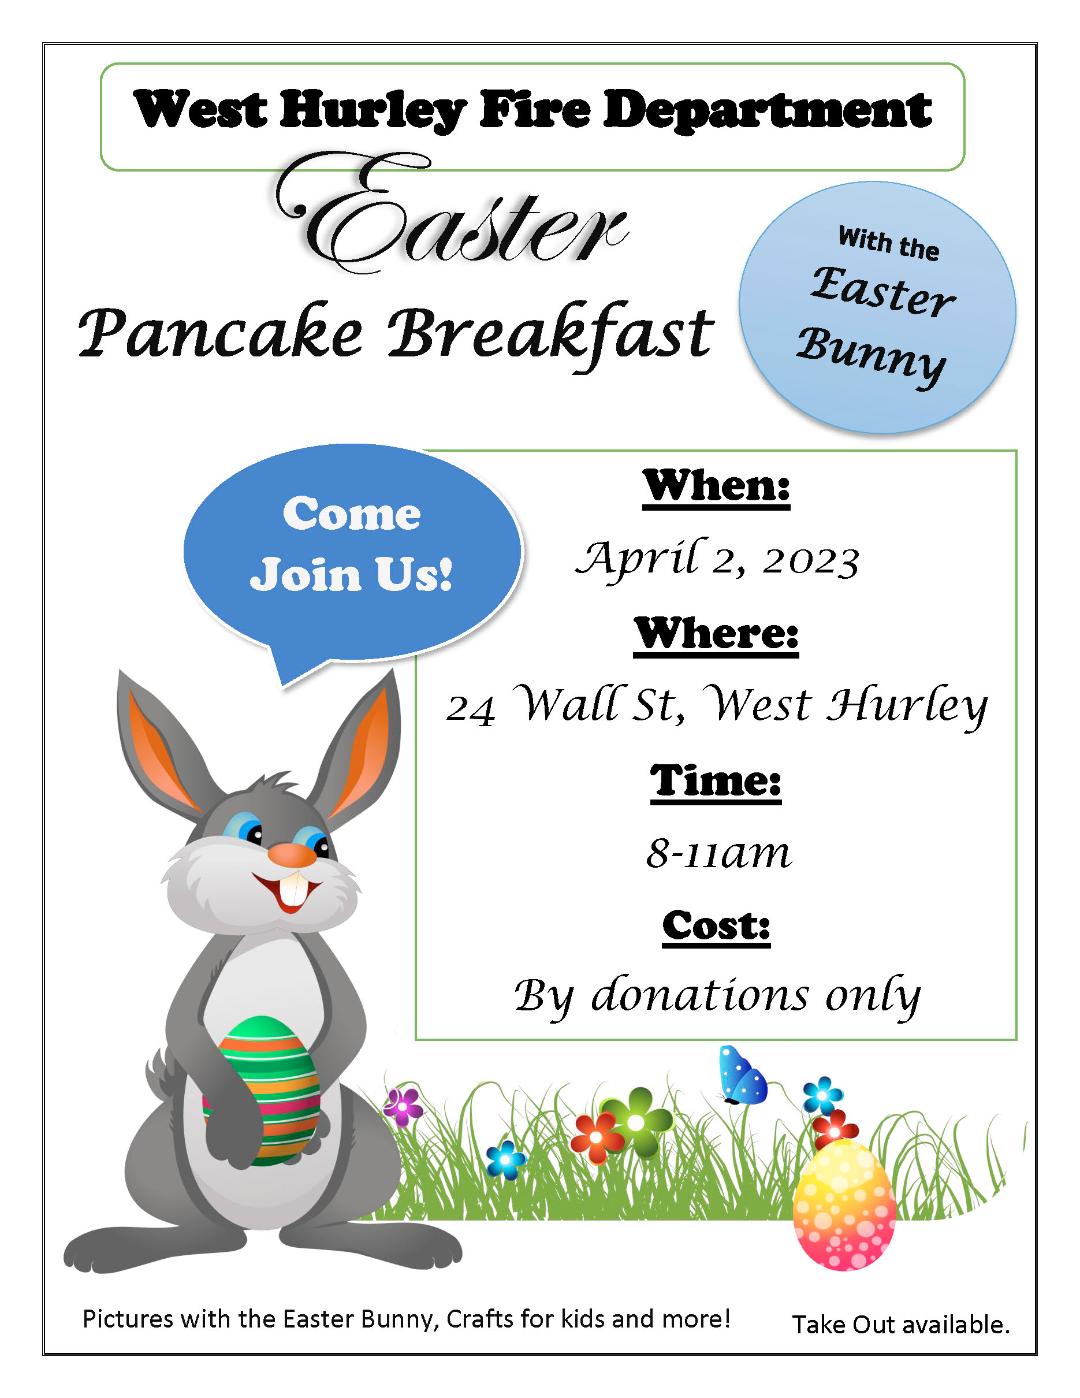 Pancake Breakfast with the Easter Bunny!